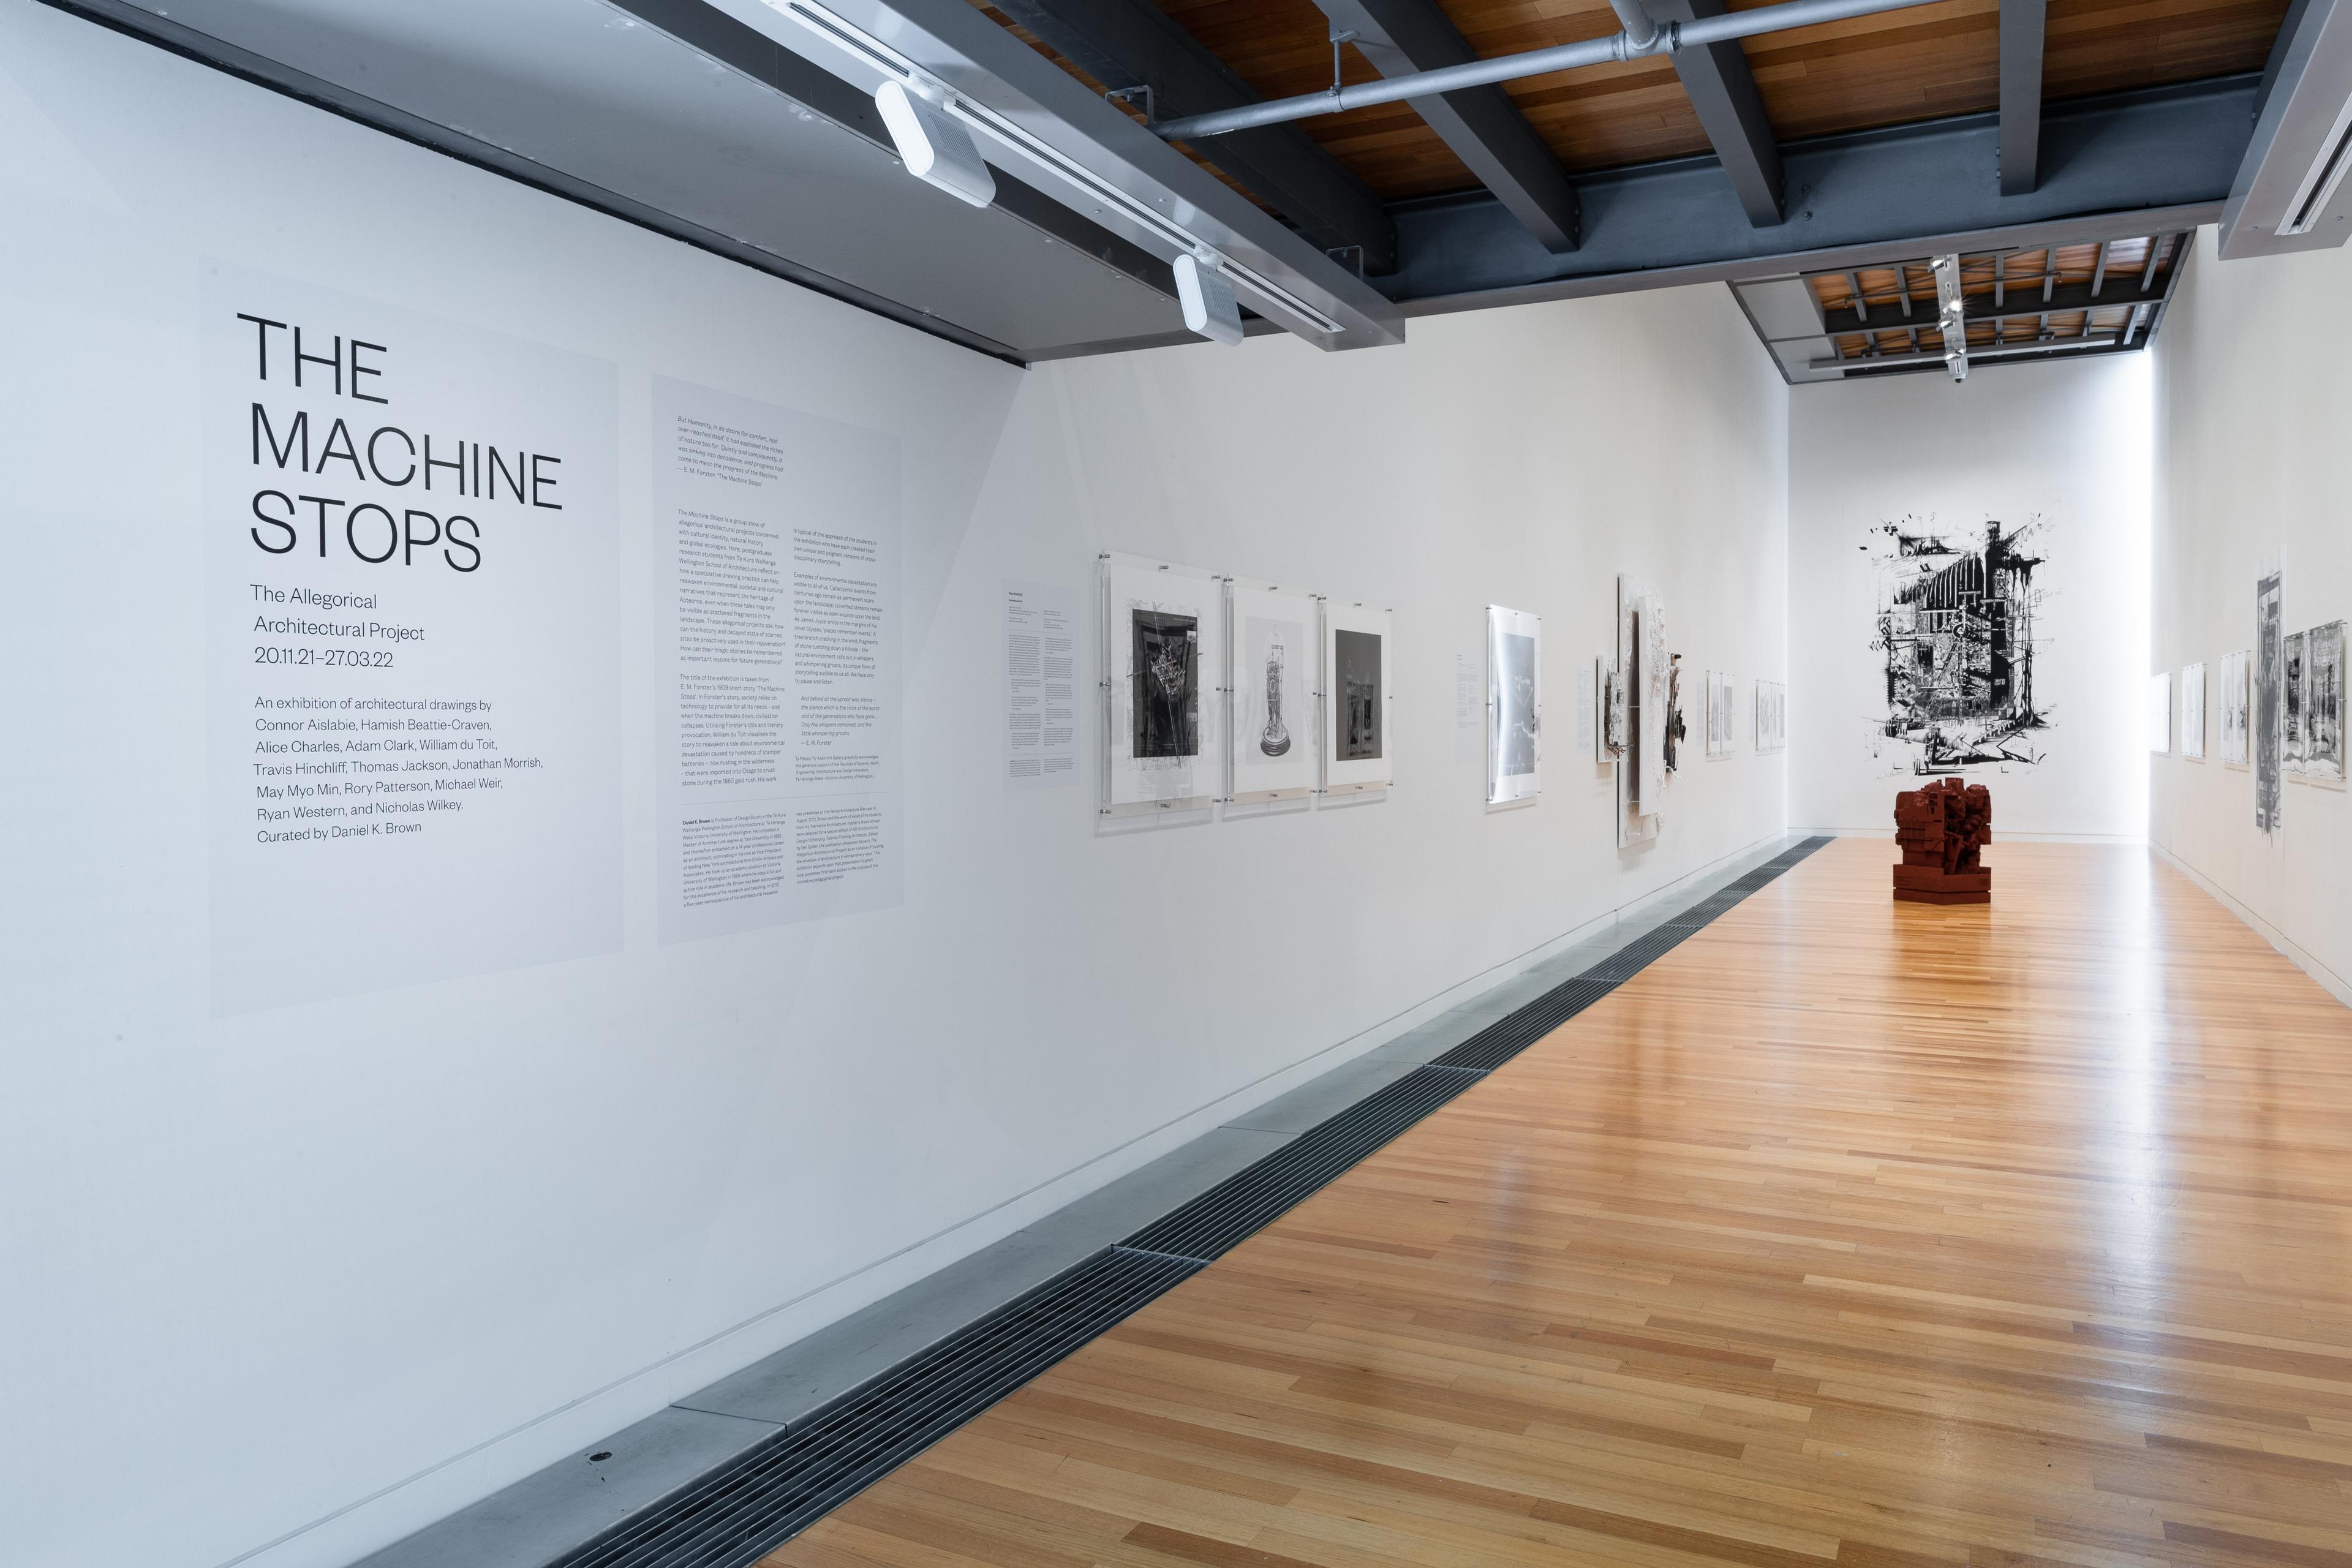 Wide view of a gallery with text and artworks on the white walls and a dark red sculpture on the wooden floor. Daniel K. Brown 